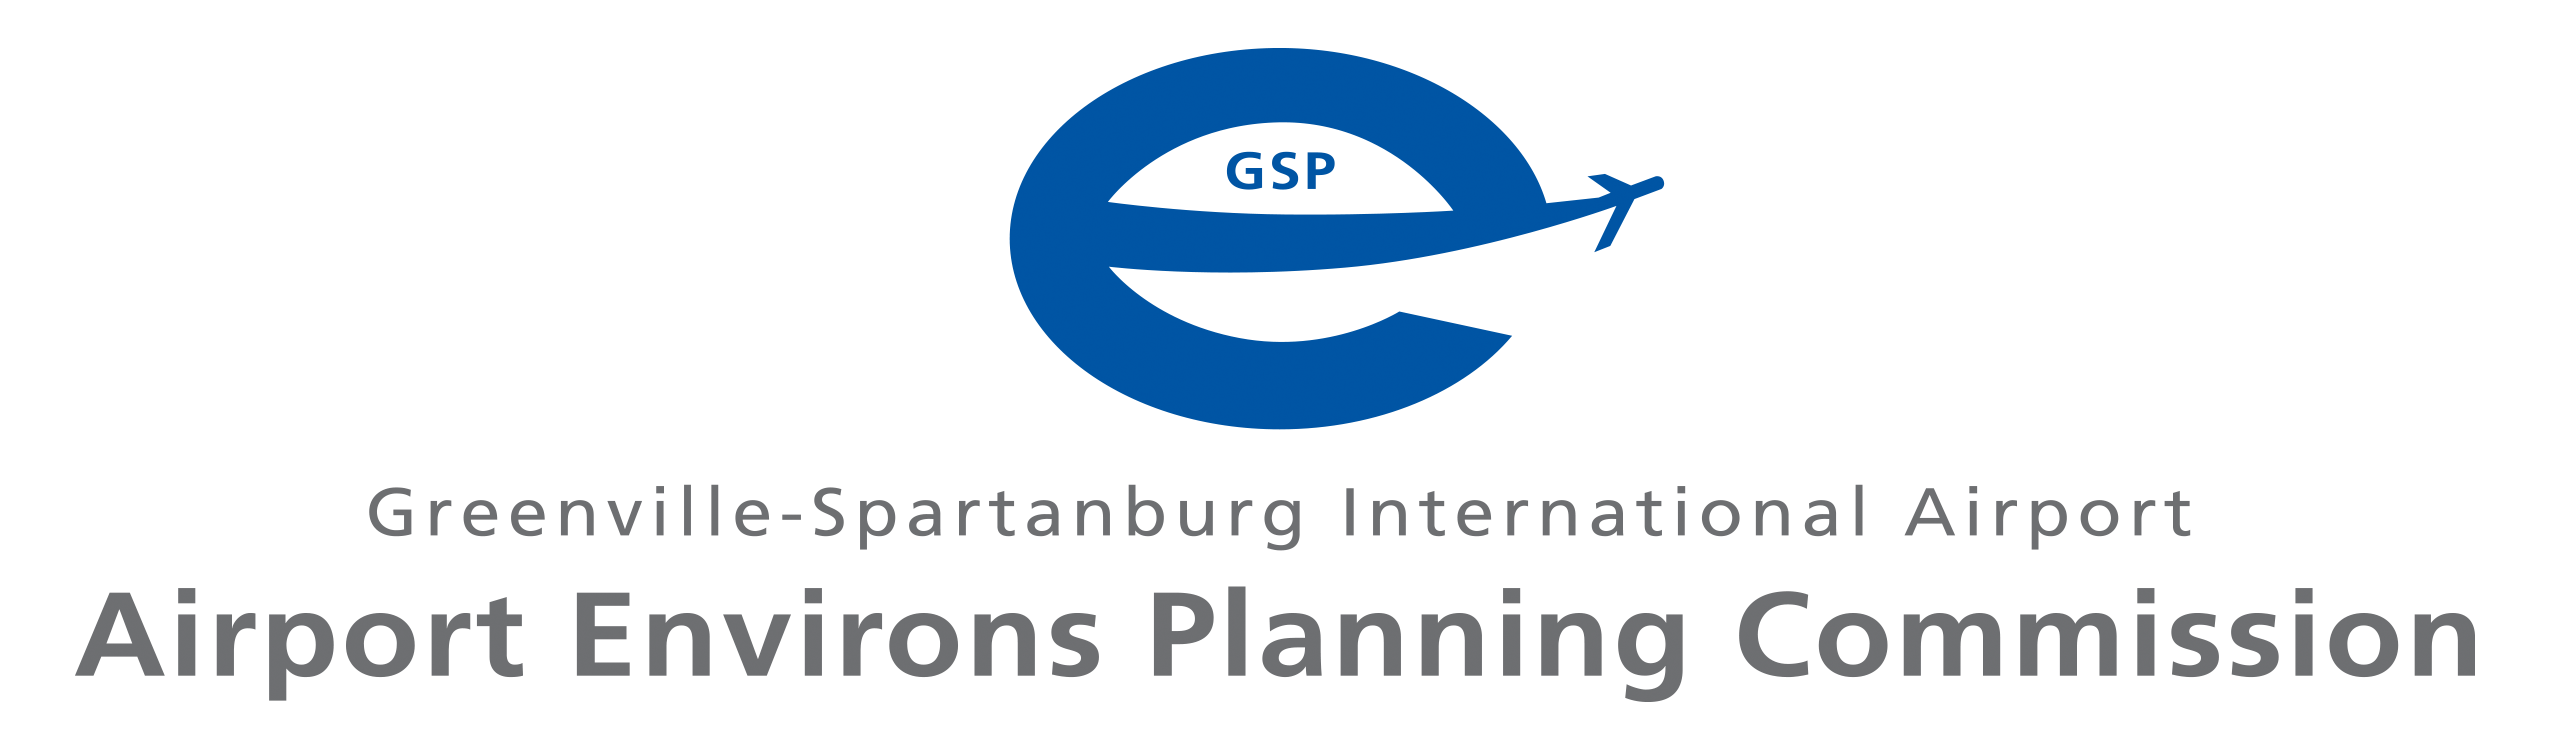 GSP Environs Planning Commission Logo